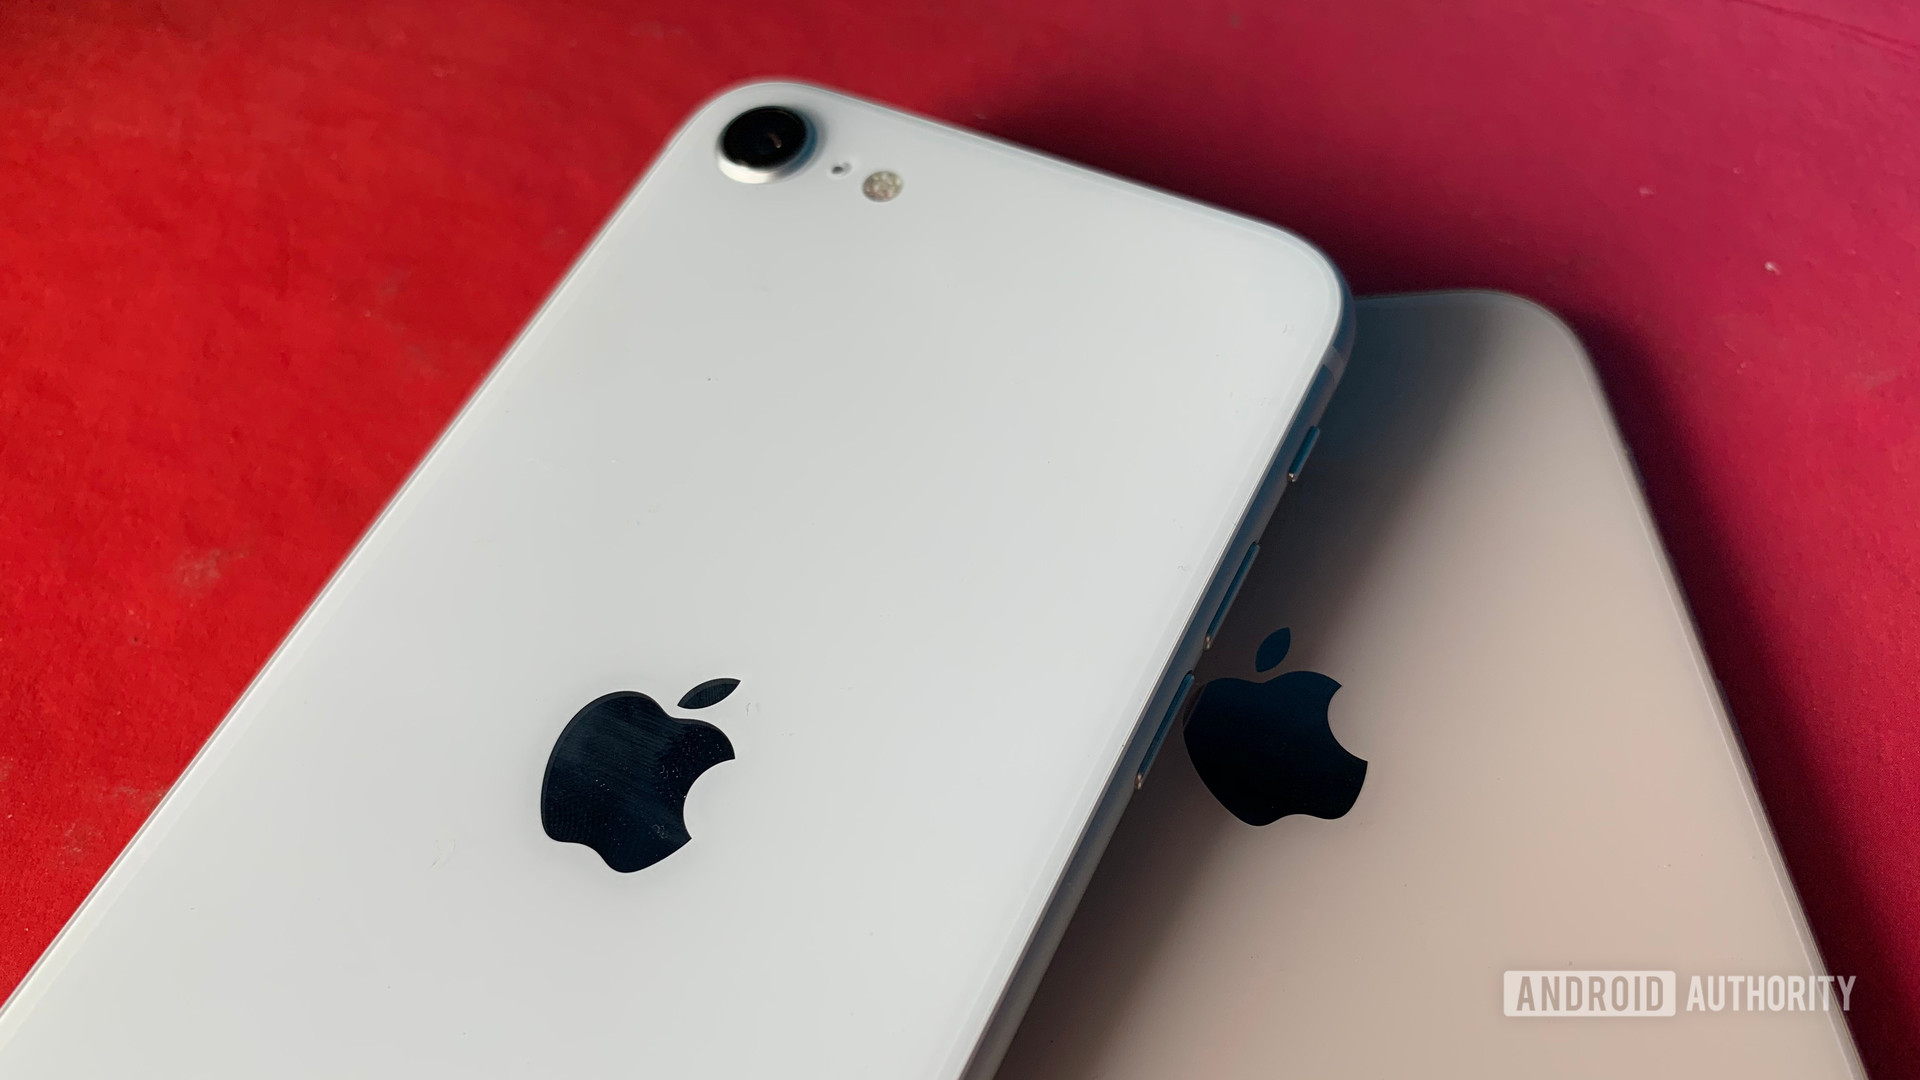 iPhone SE (2020) vs iPhone 8: Battle of the budget iPhones